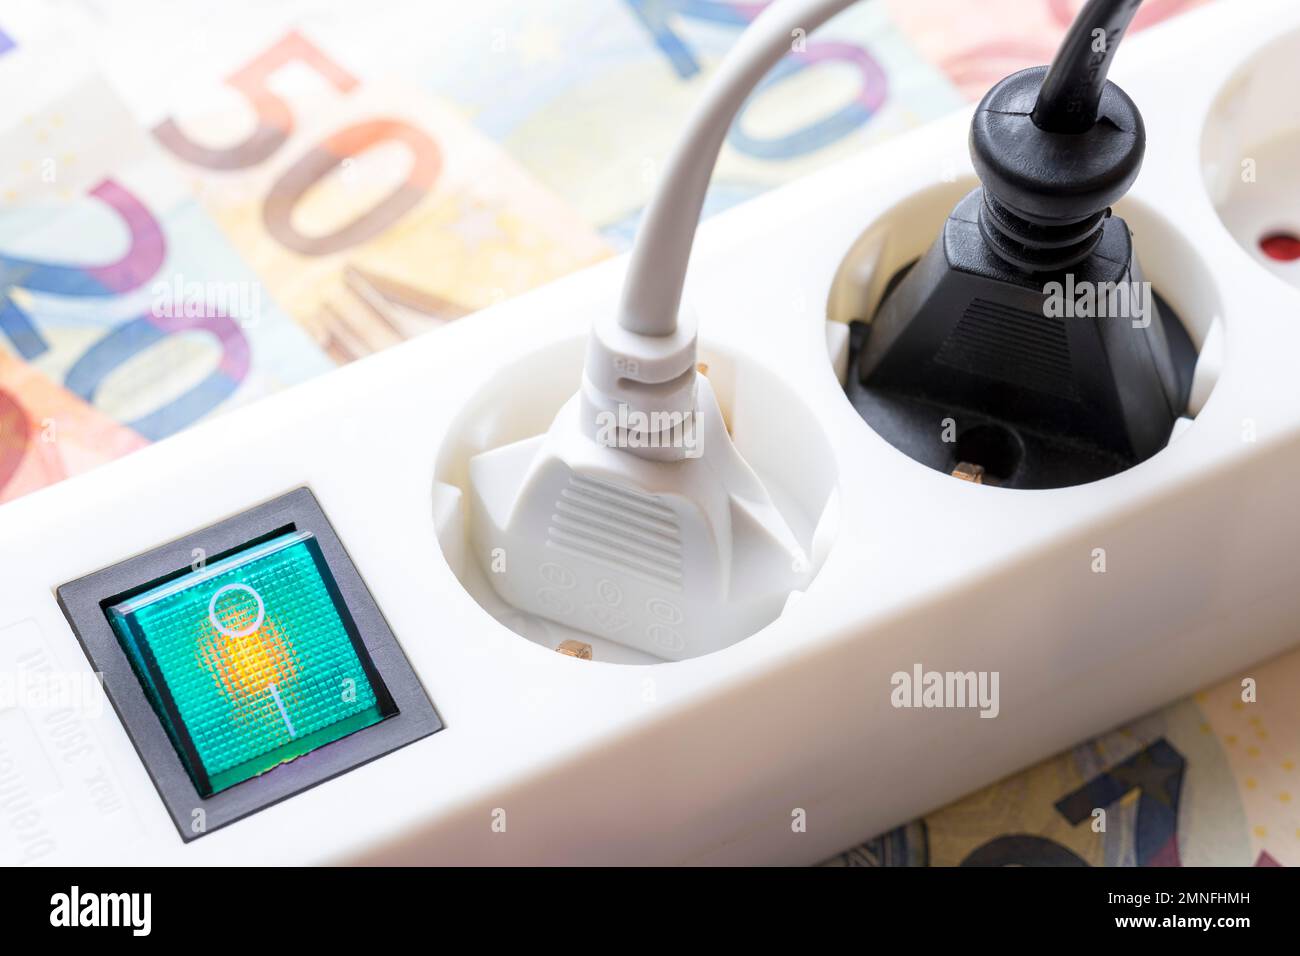 Incidental costs electricity, symbolic image, power strip with switch, plugged-in plugs, banknotes, Germany Stock Photo